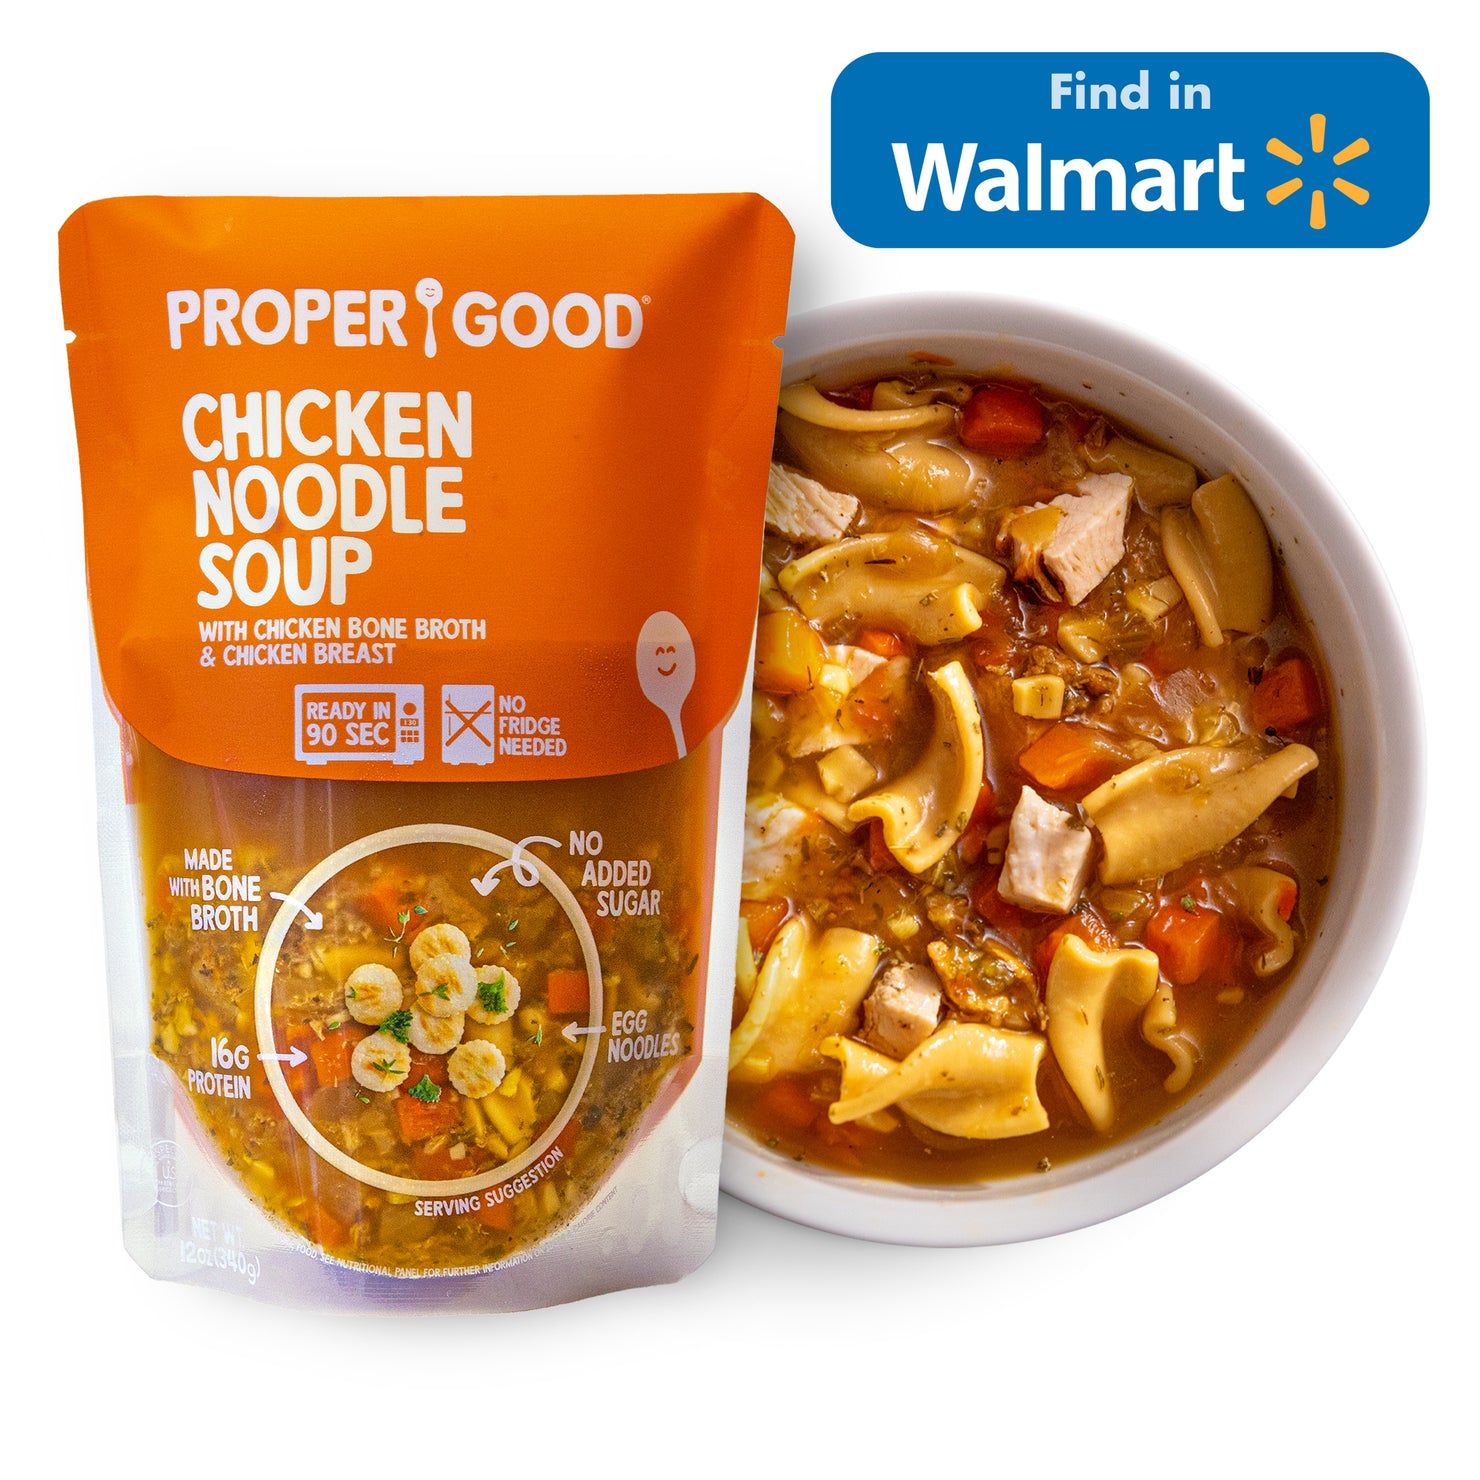 Chicken Noodle Soup in Bowl and in Pouch - Find in Walmart -  Eat Proper Good